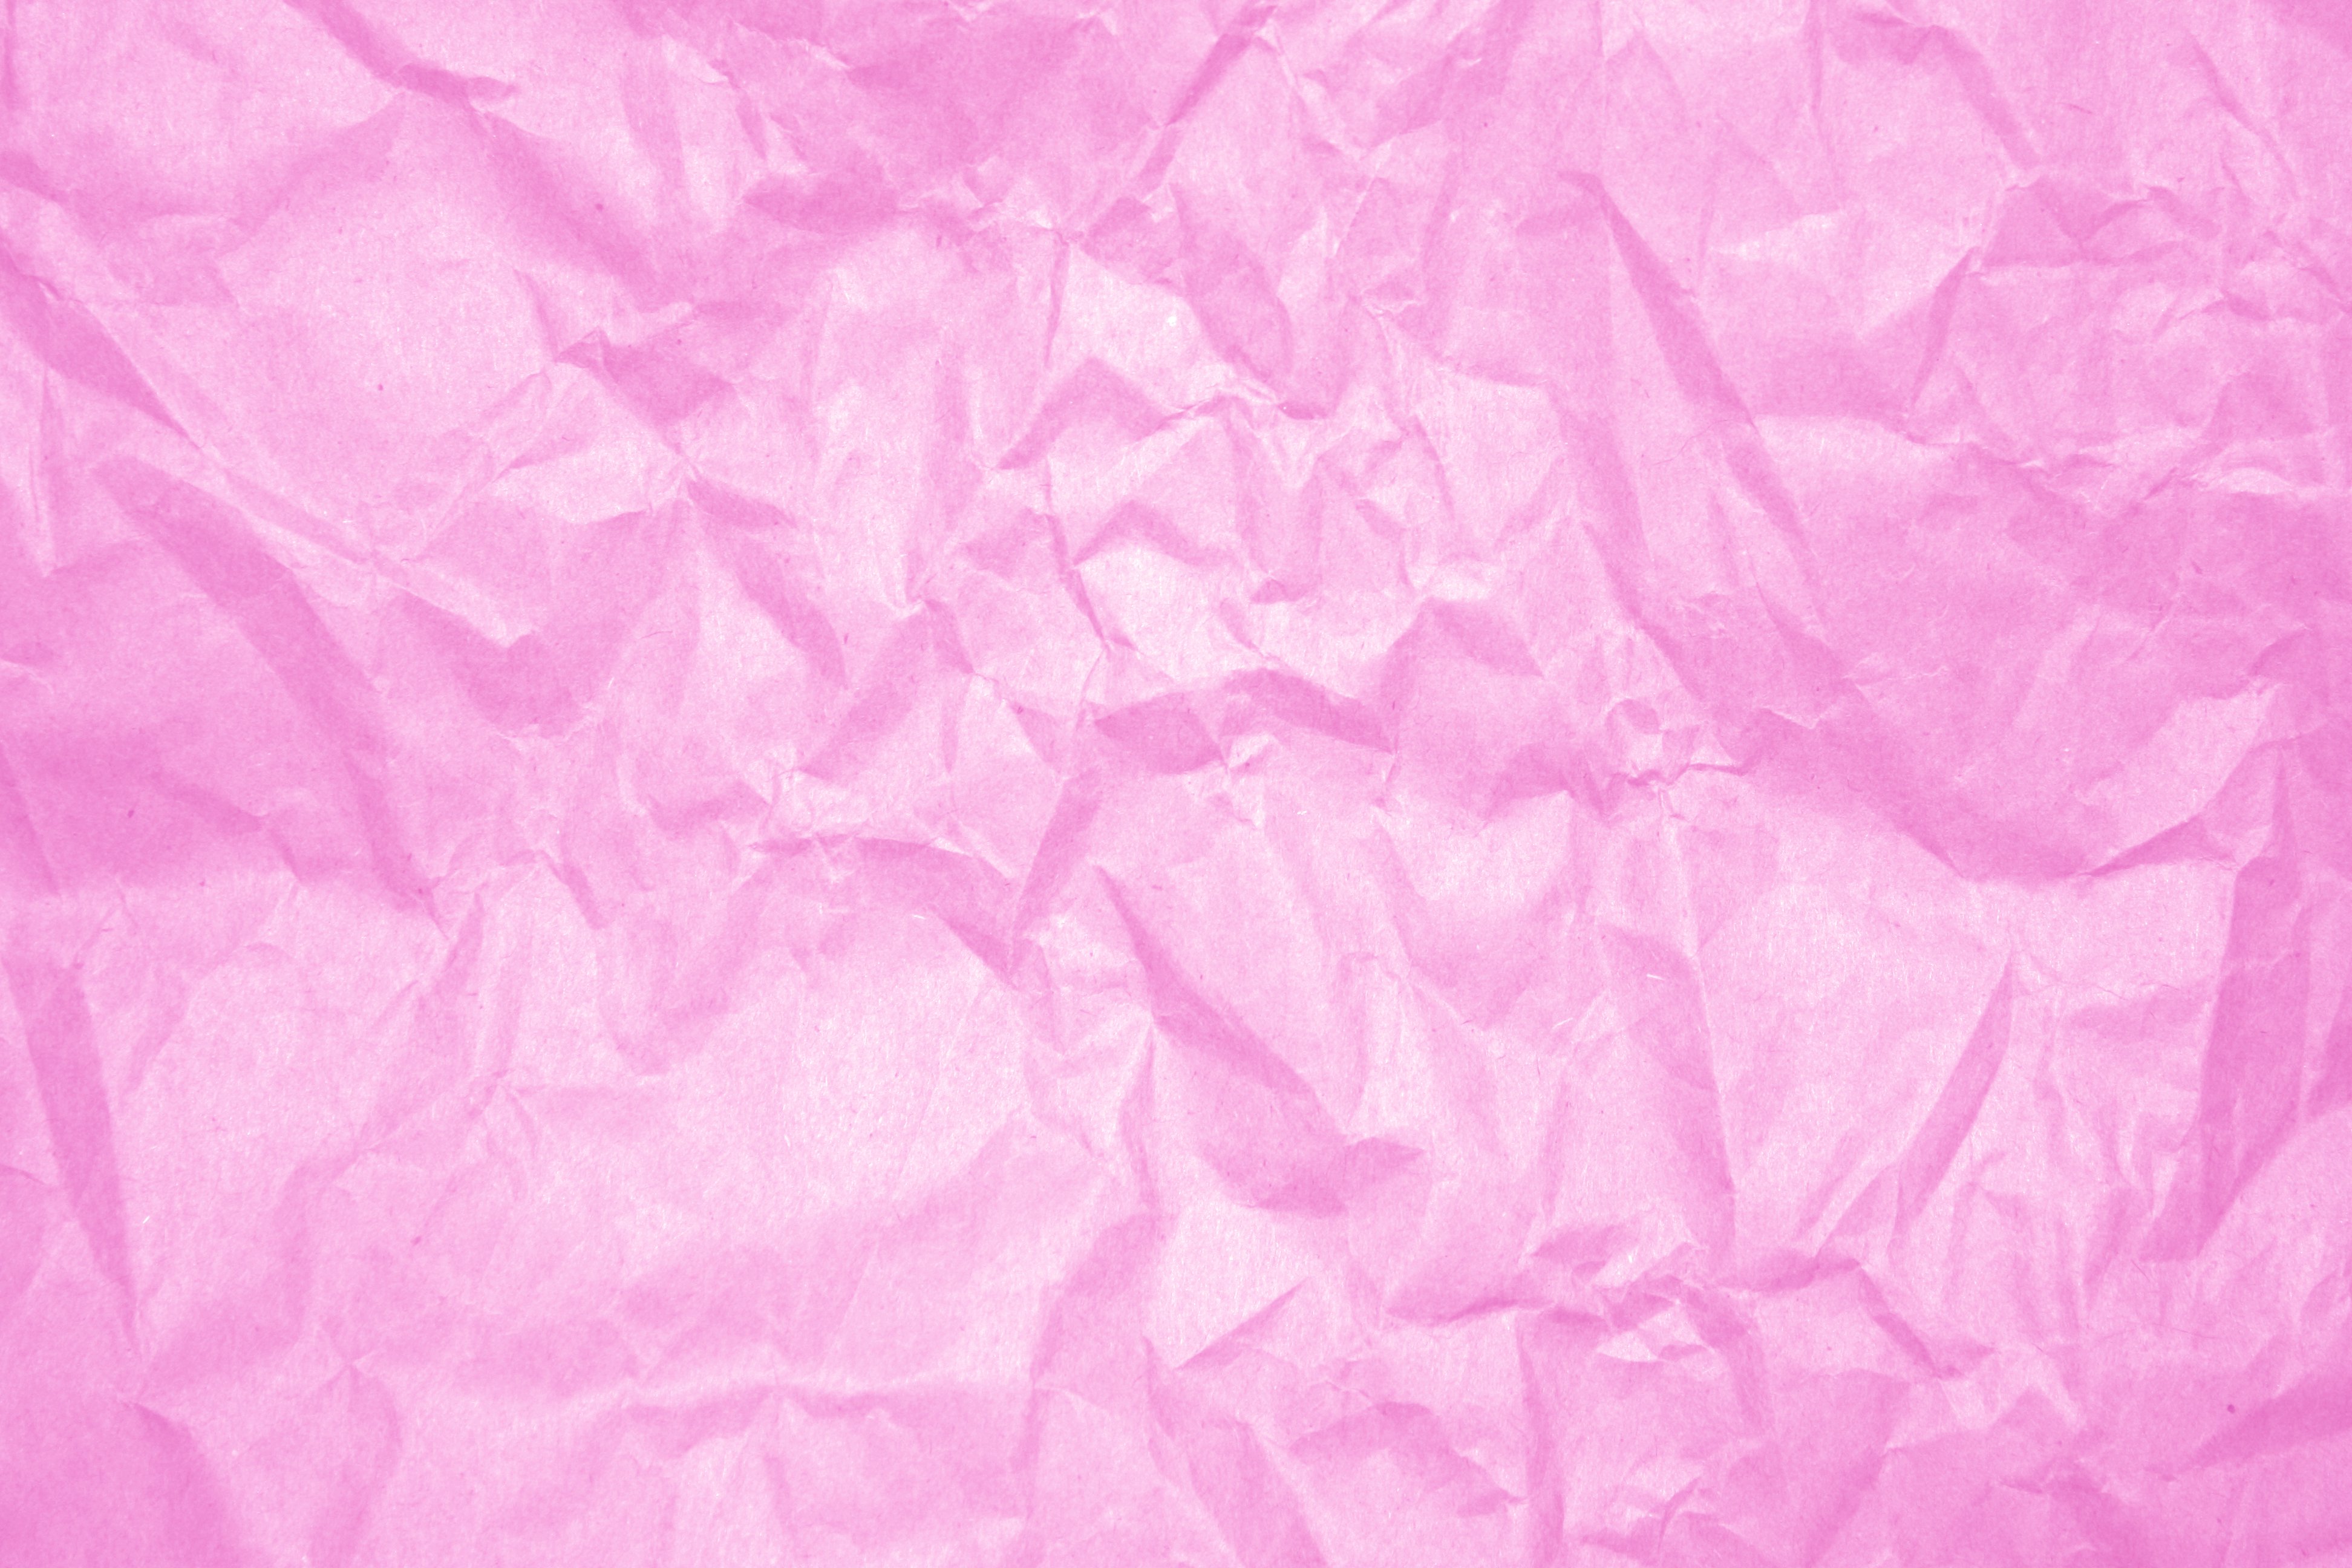 Crumpled Pink Paper Texture Picture | Free Photograph | Photos ...